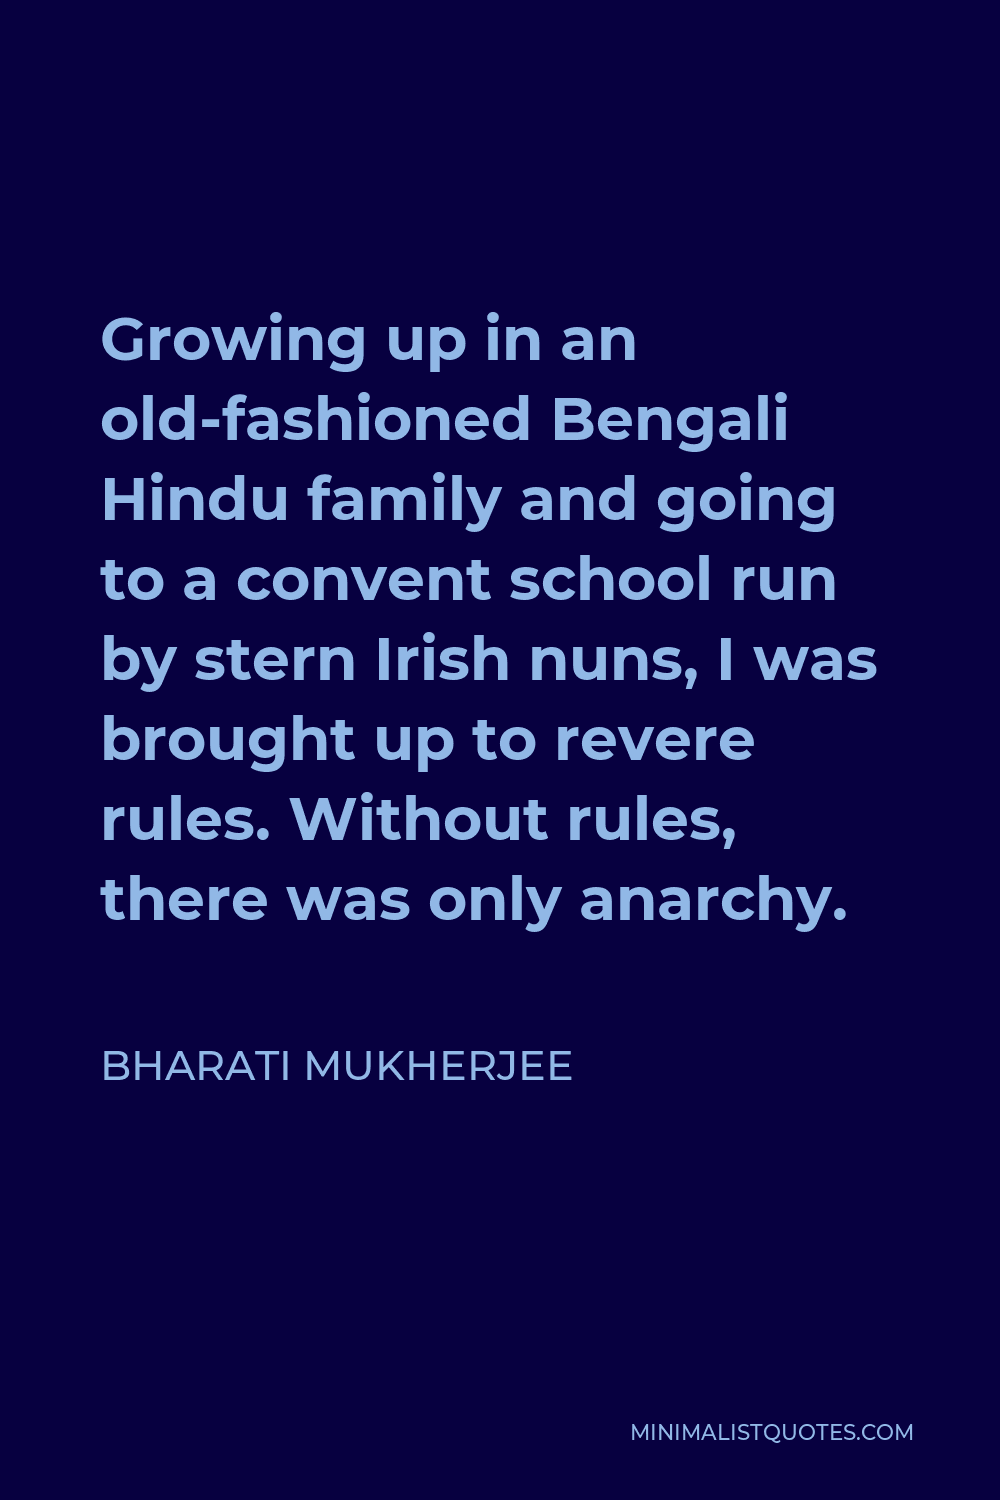 Bharati Mukherjee Quote - Growing up in an old-fashioned Bengali Hindu family and going to a convent school run by stern Irish nuns, I was brought up to revere rules. Without rules, there was only anarchy.